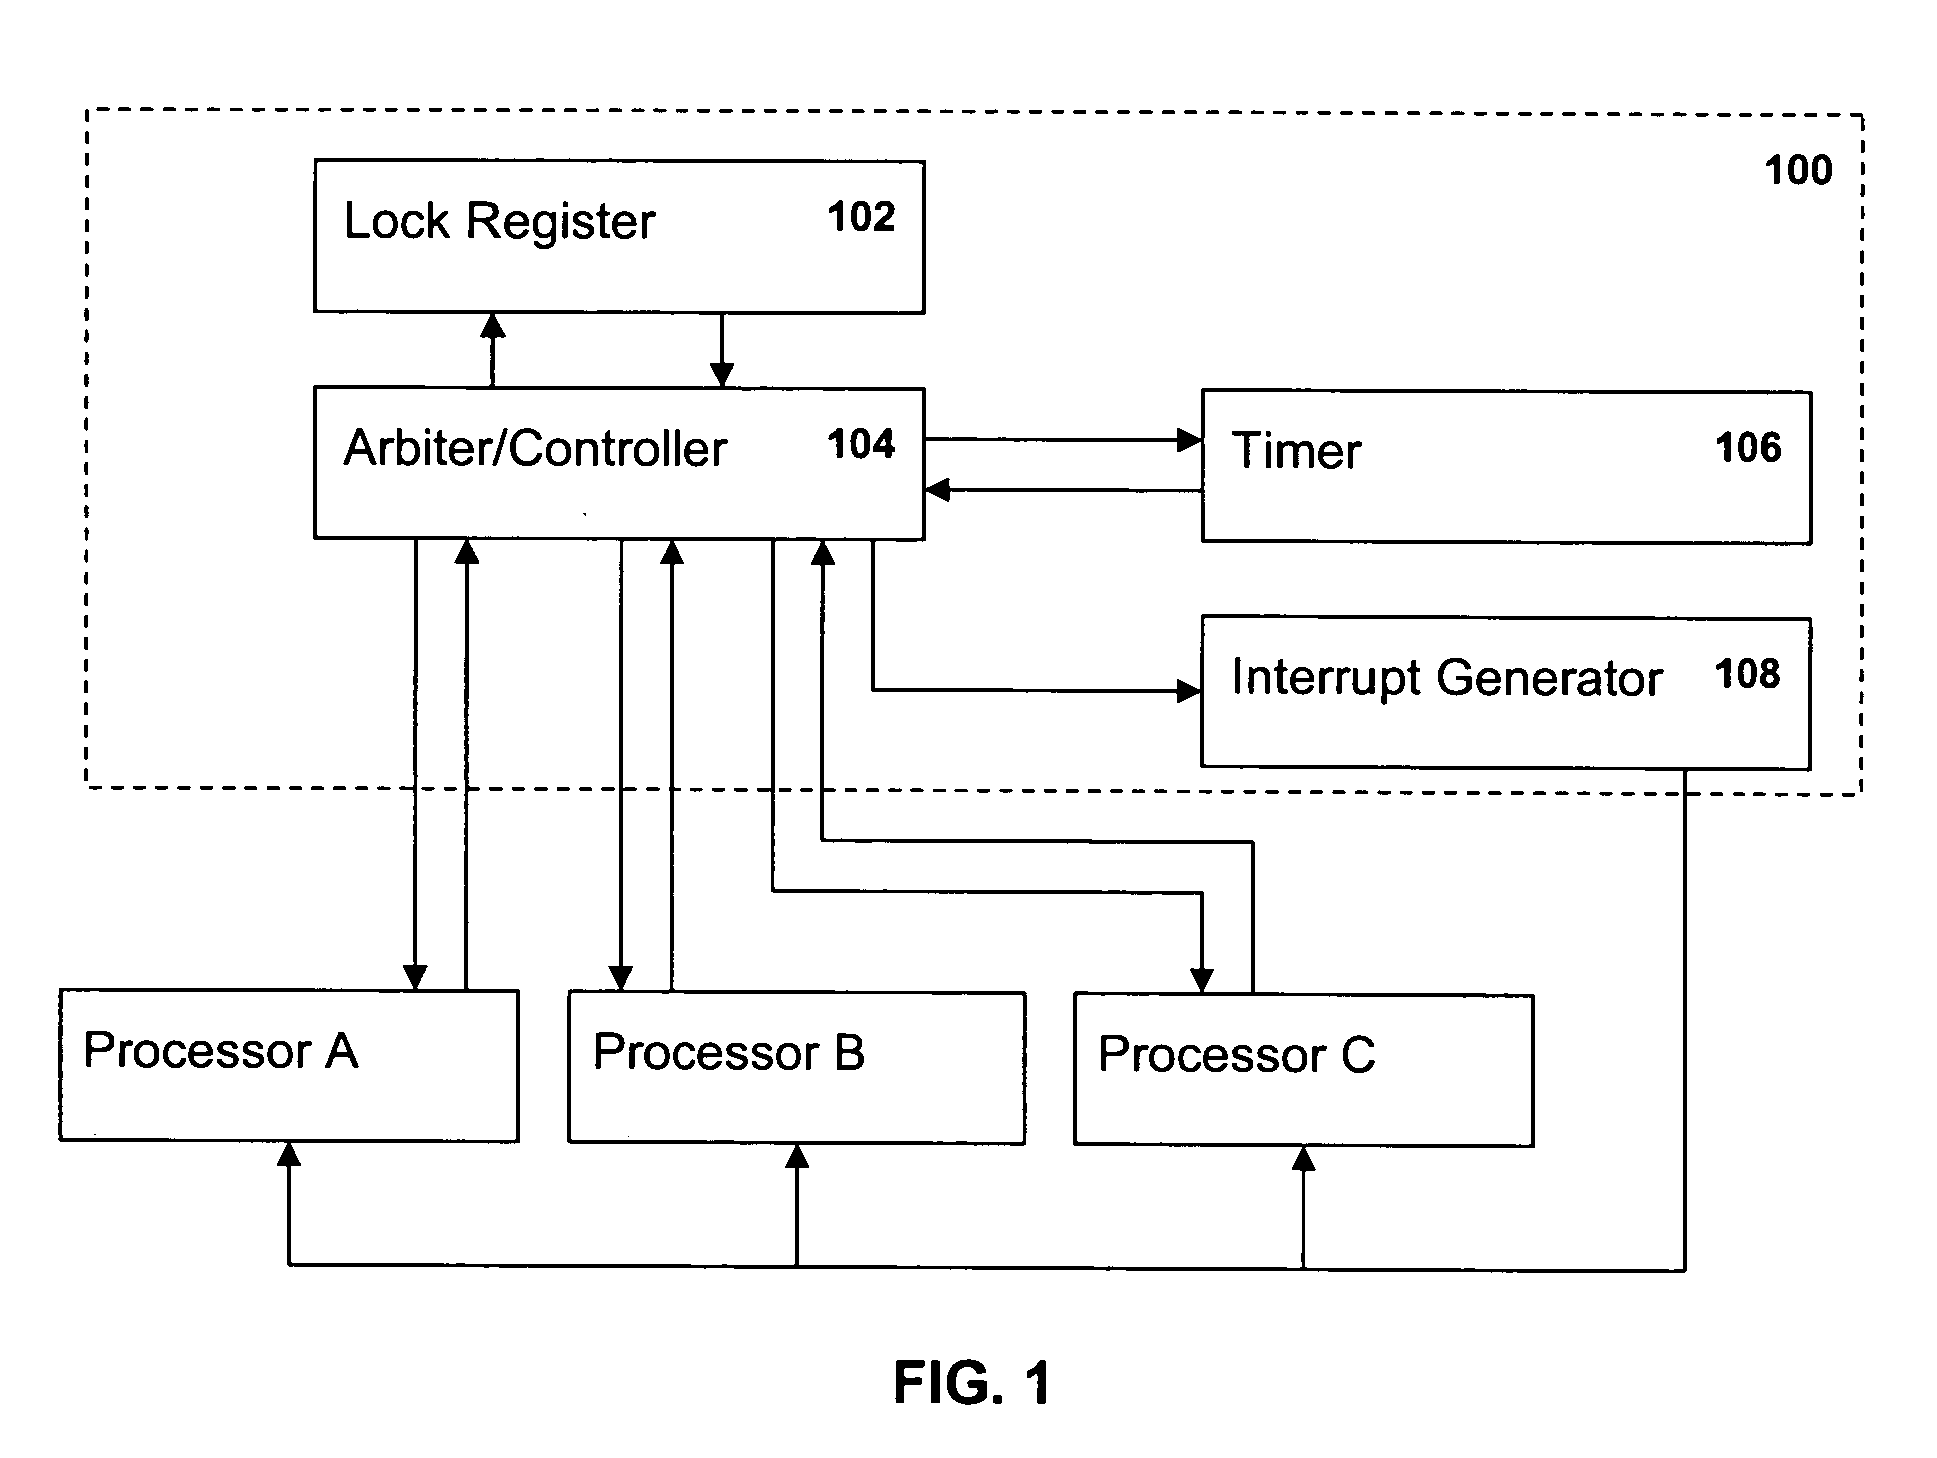 Management of microcode lock in a shared computing resource